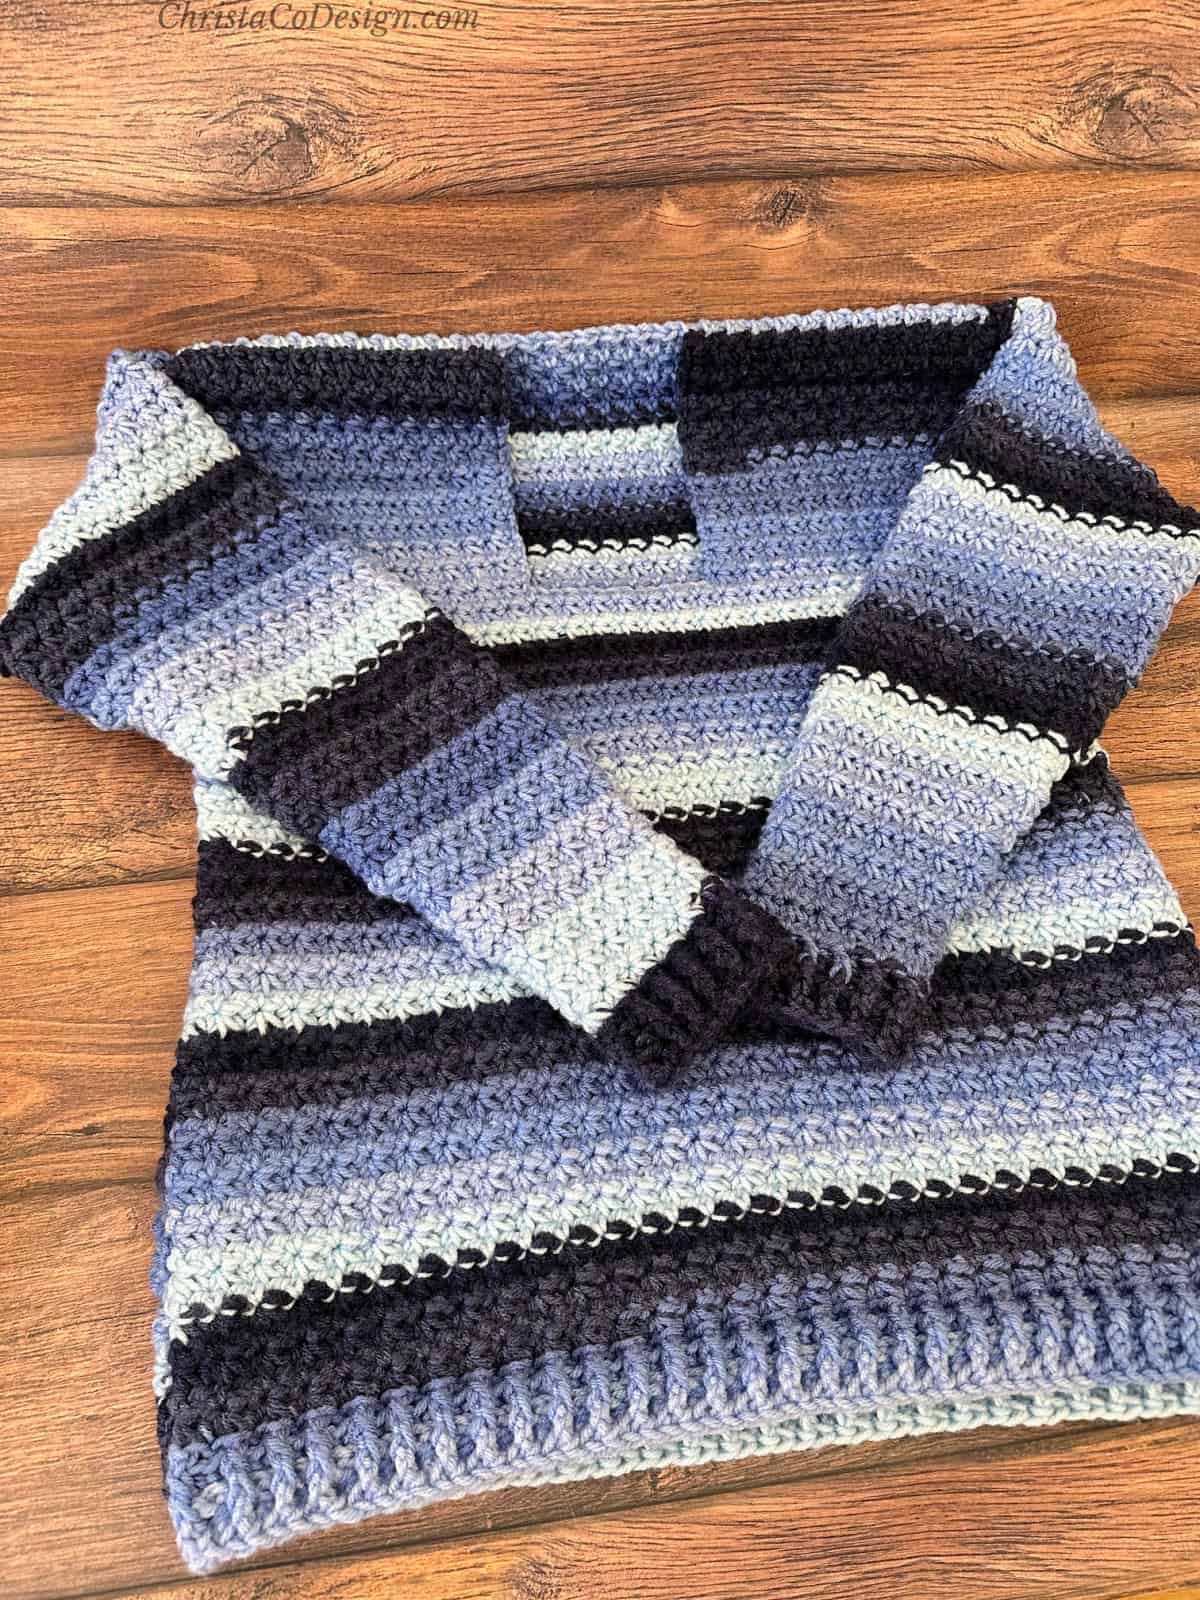 Blue striped crochet sweater seamed and ready for neck.